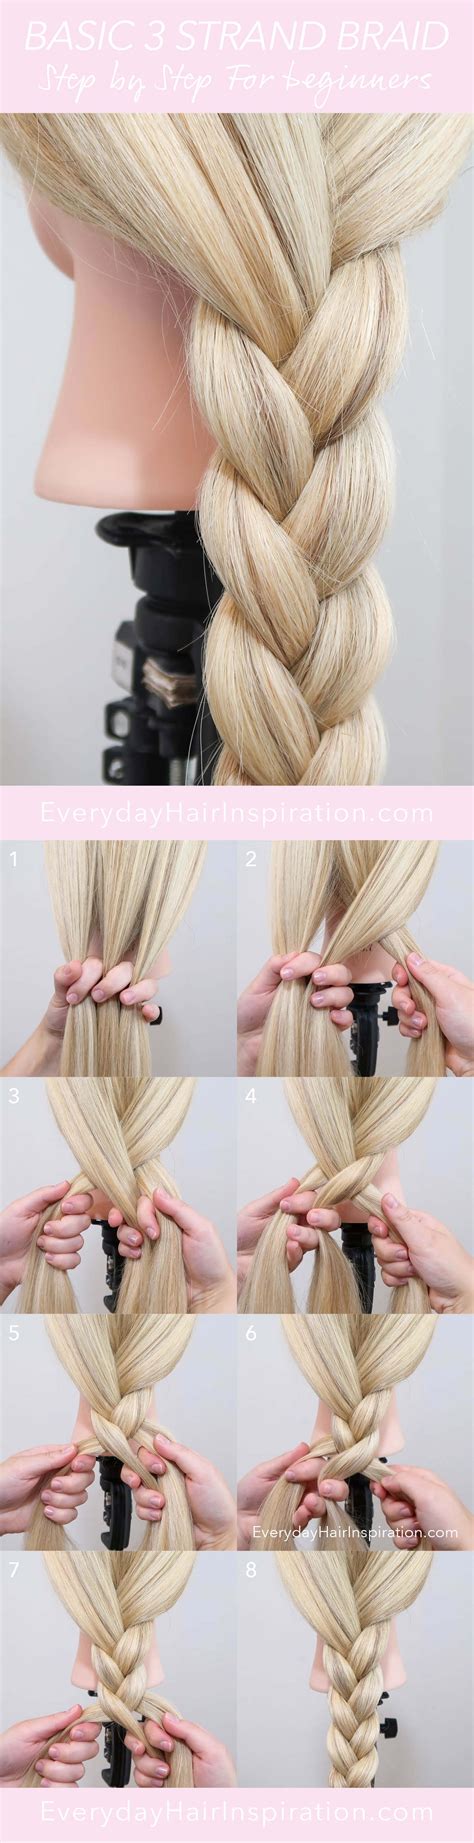 Fresh Steps To Braid Hair For New Style